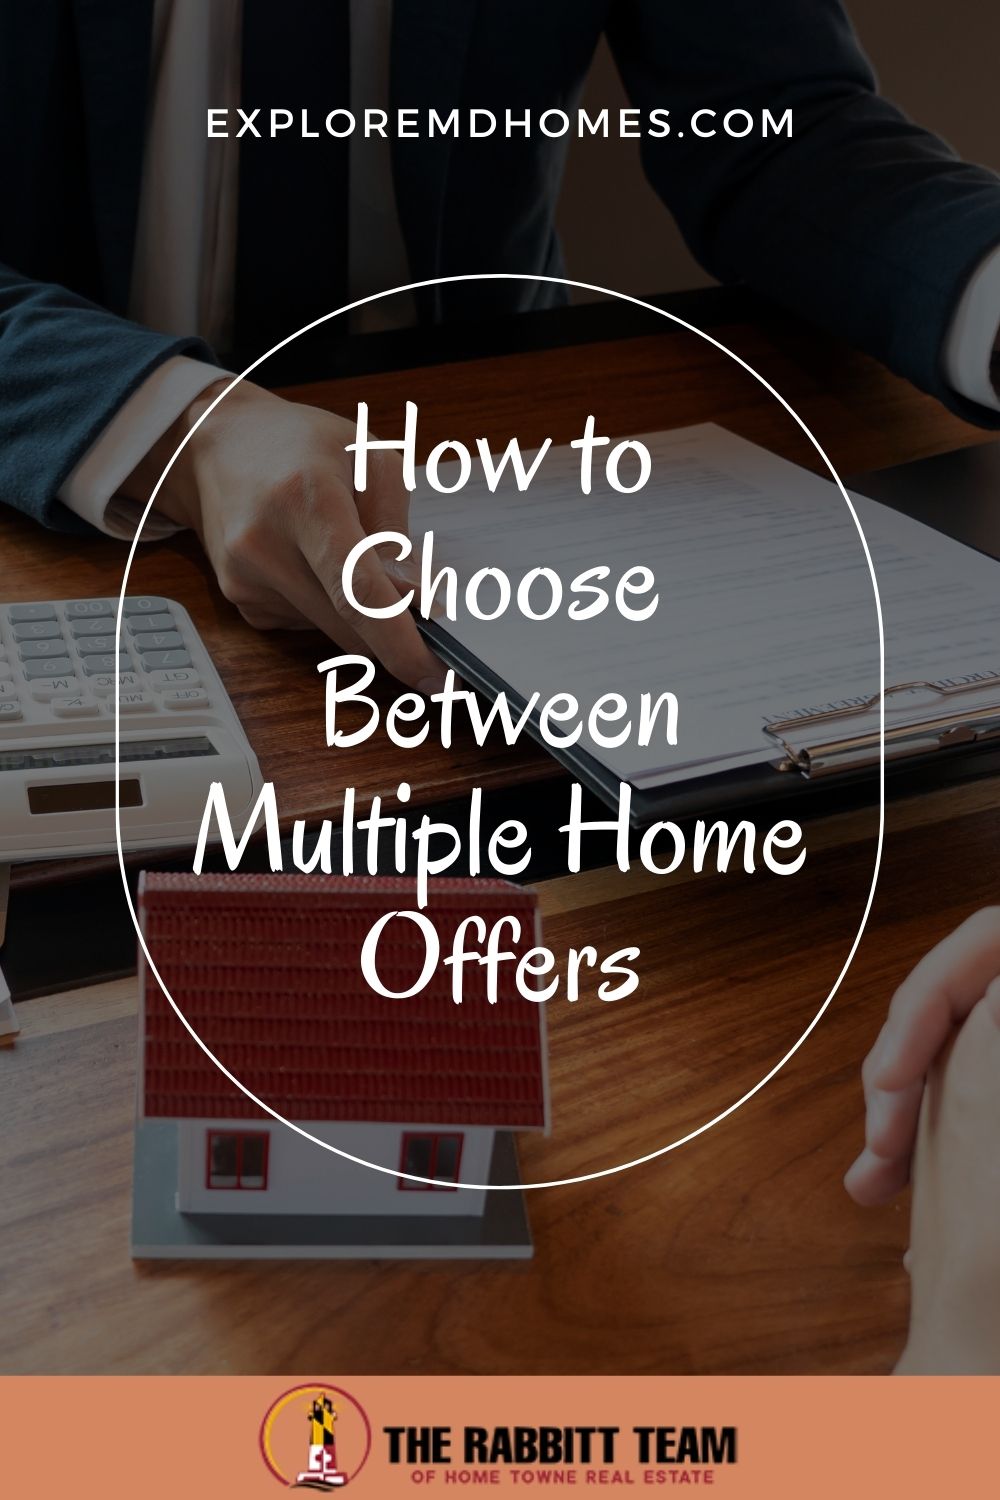 How to Choose Between Multiple Home Offers